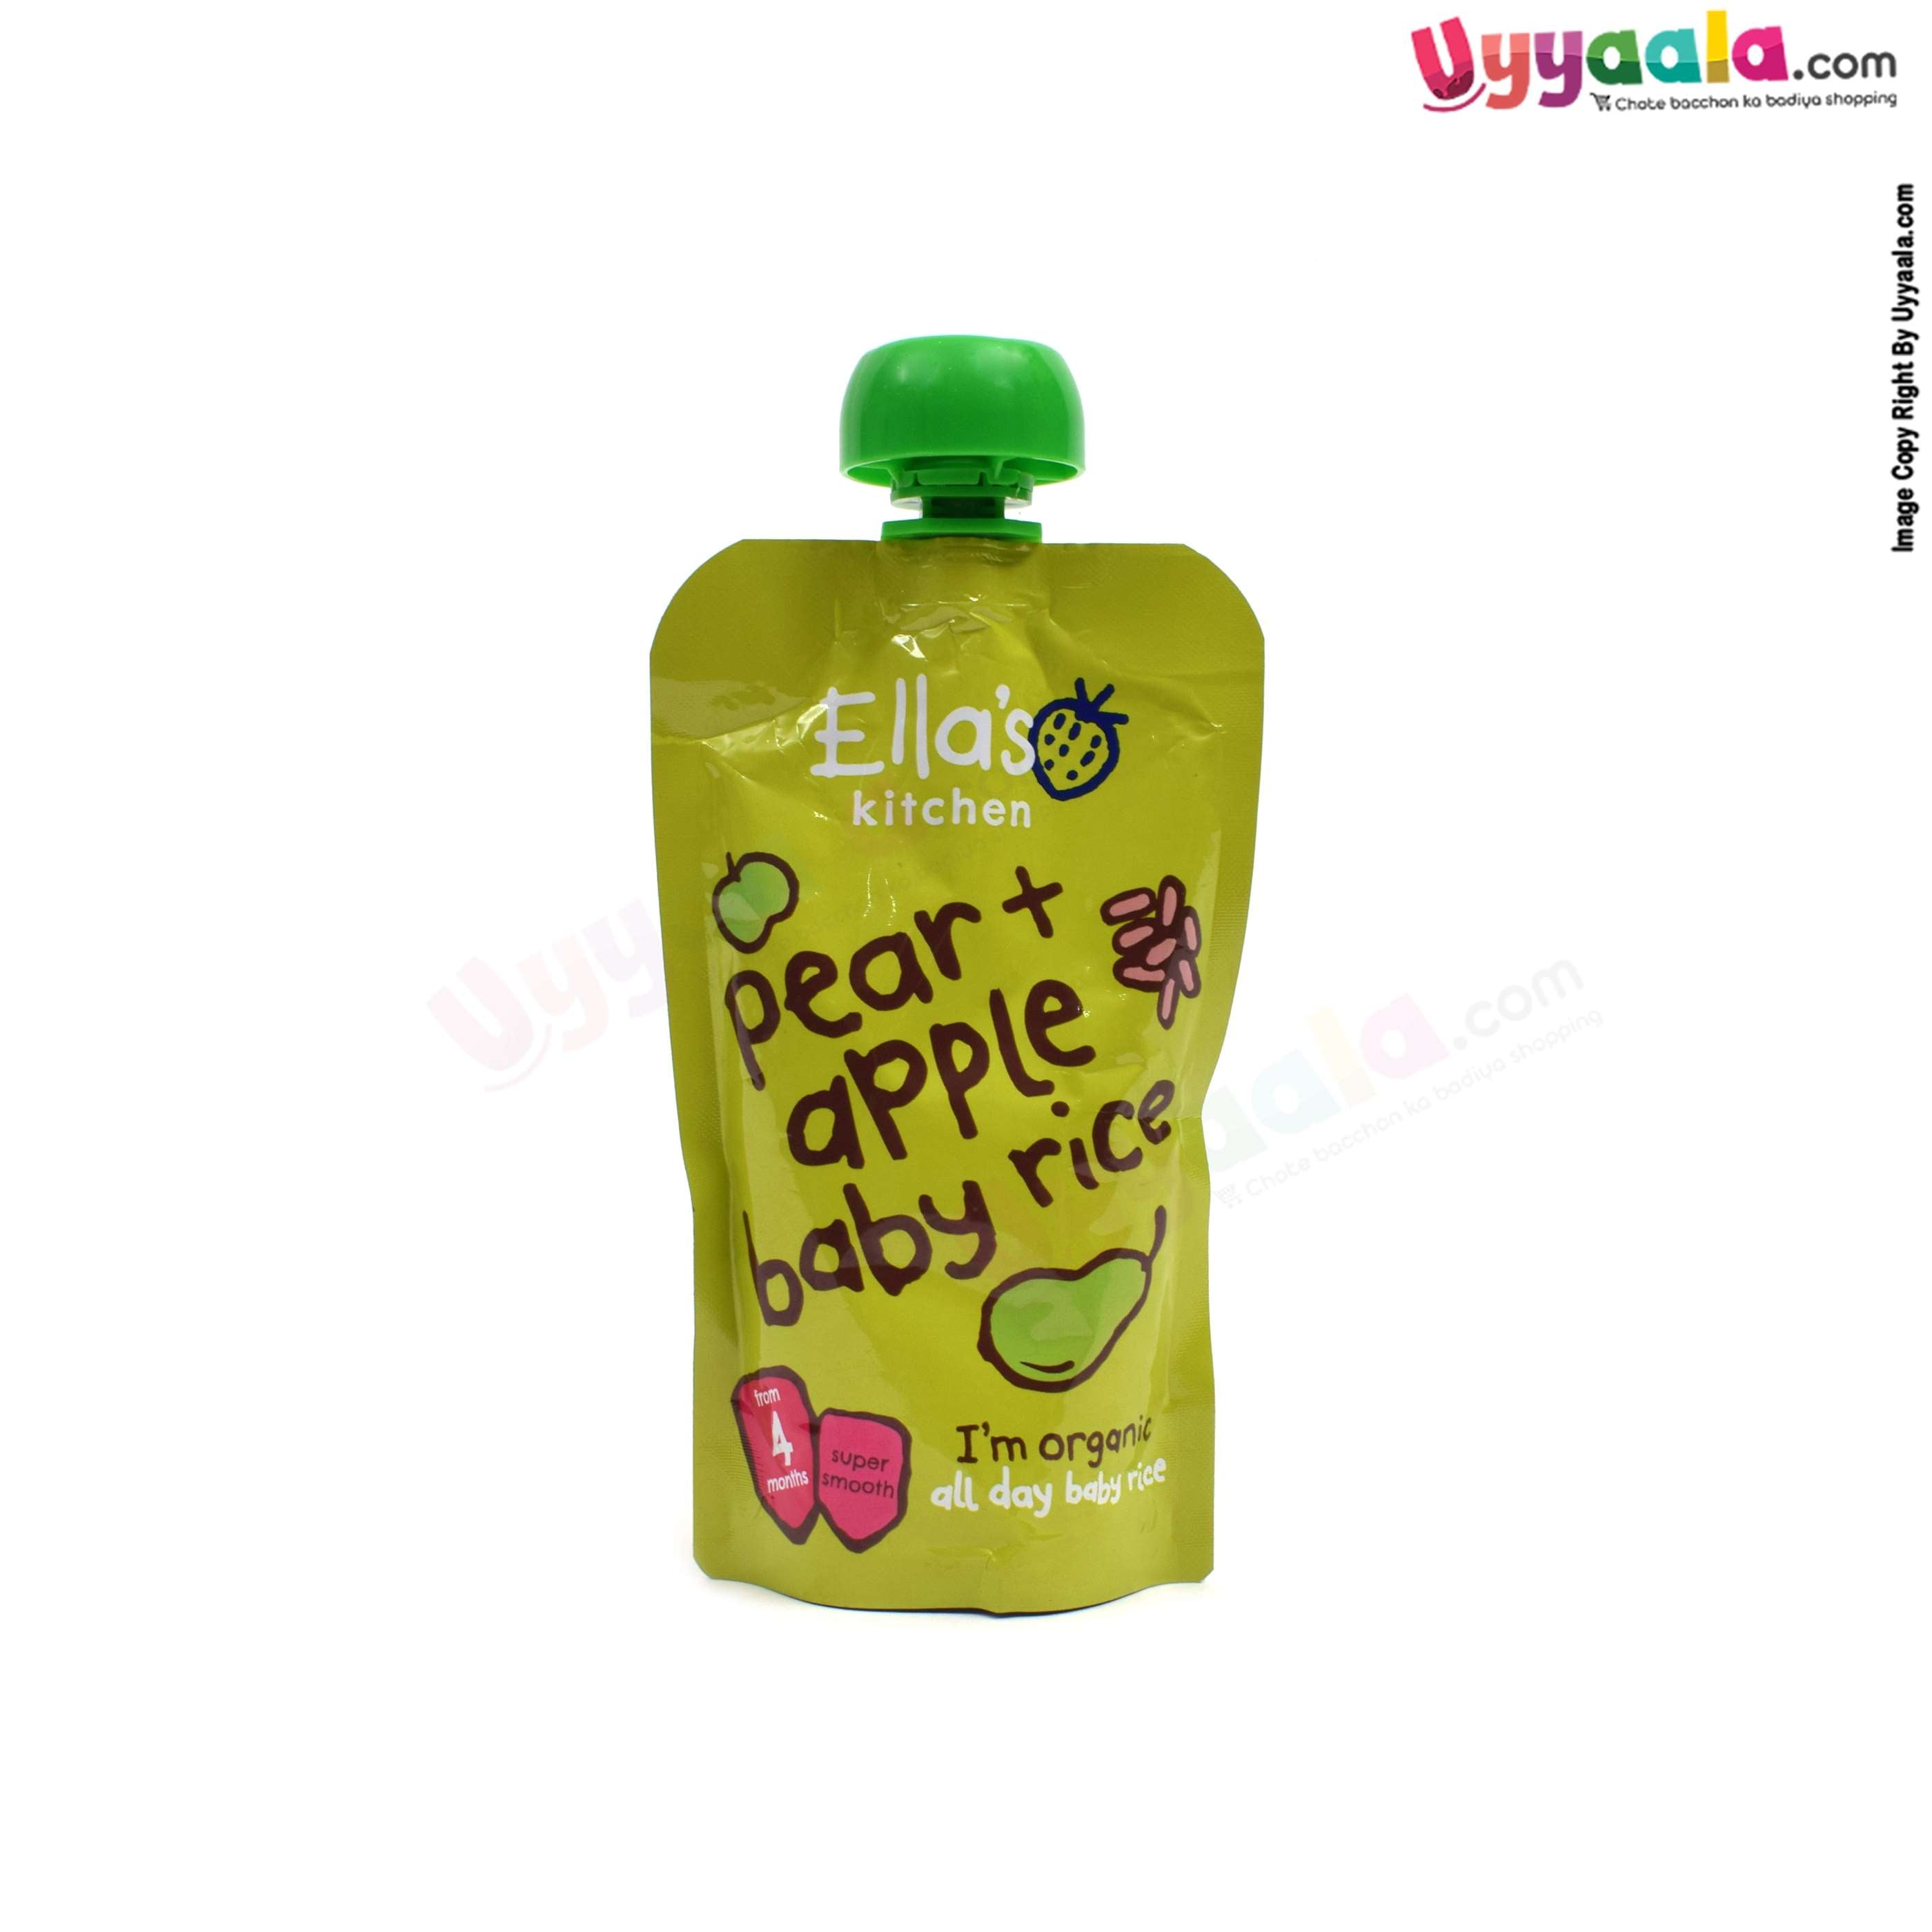 ELLA'S KITCHEN Pear + apple baby rice, super smooth purees for babies - 120g, 4 months +